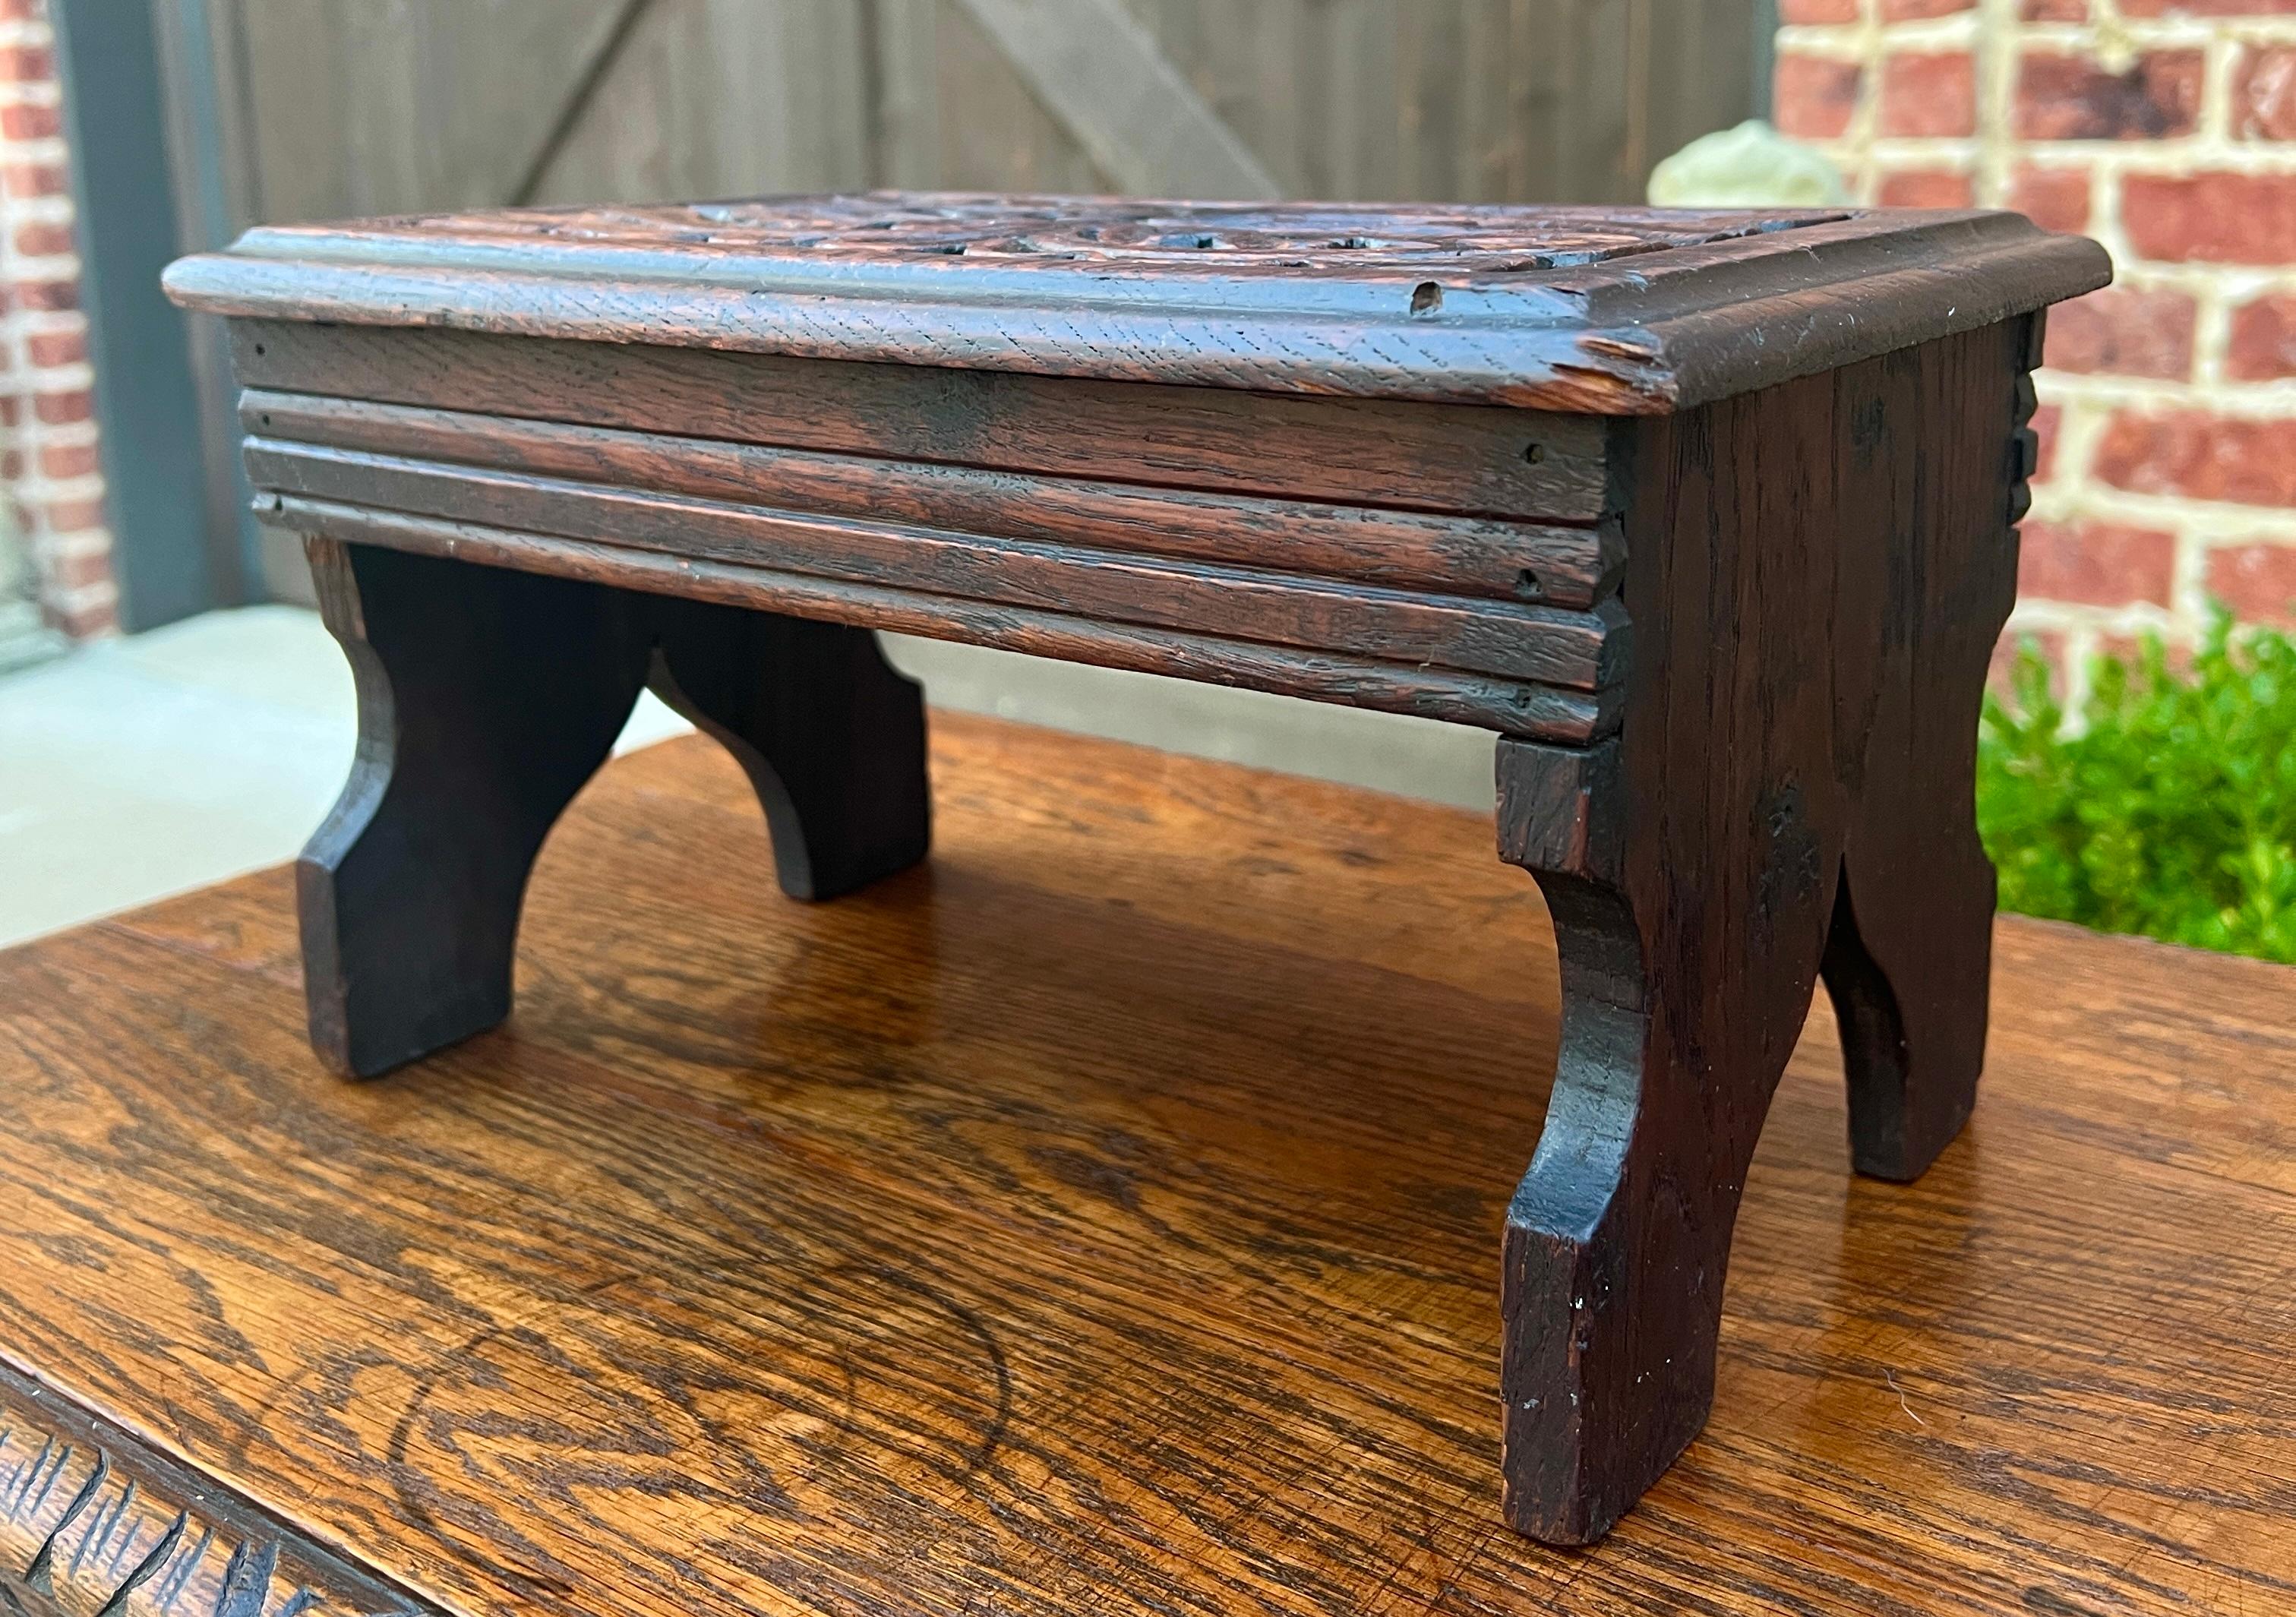 Early 20th Century Antique English Kettle Stand Small Footstool Bench Carved Oak c. 1920s-30s For Sale